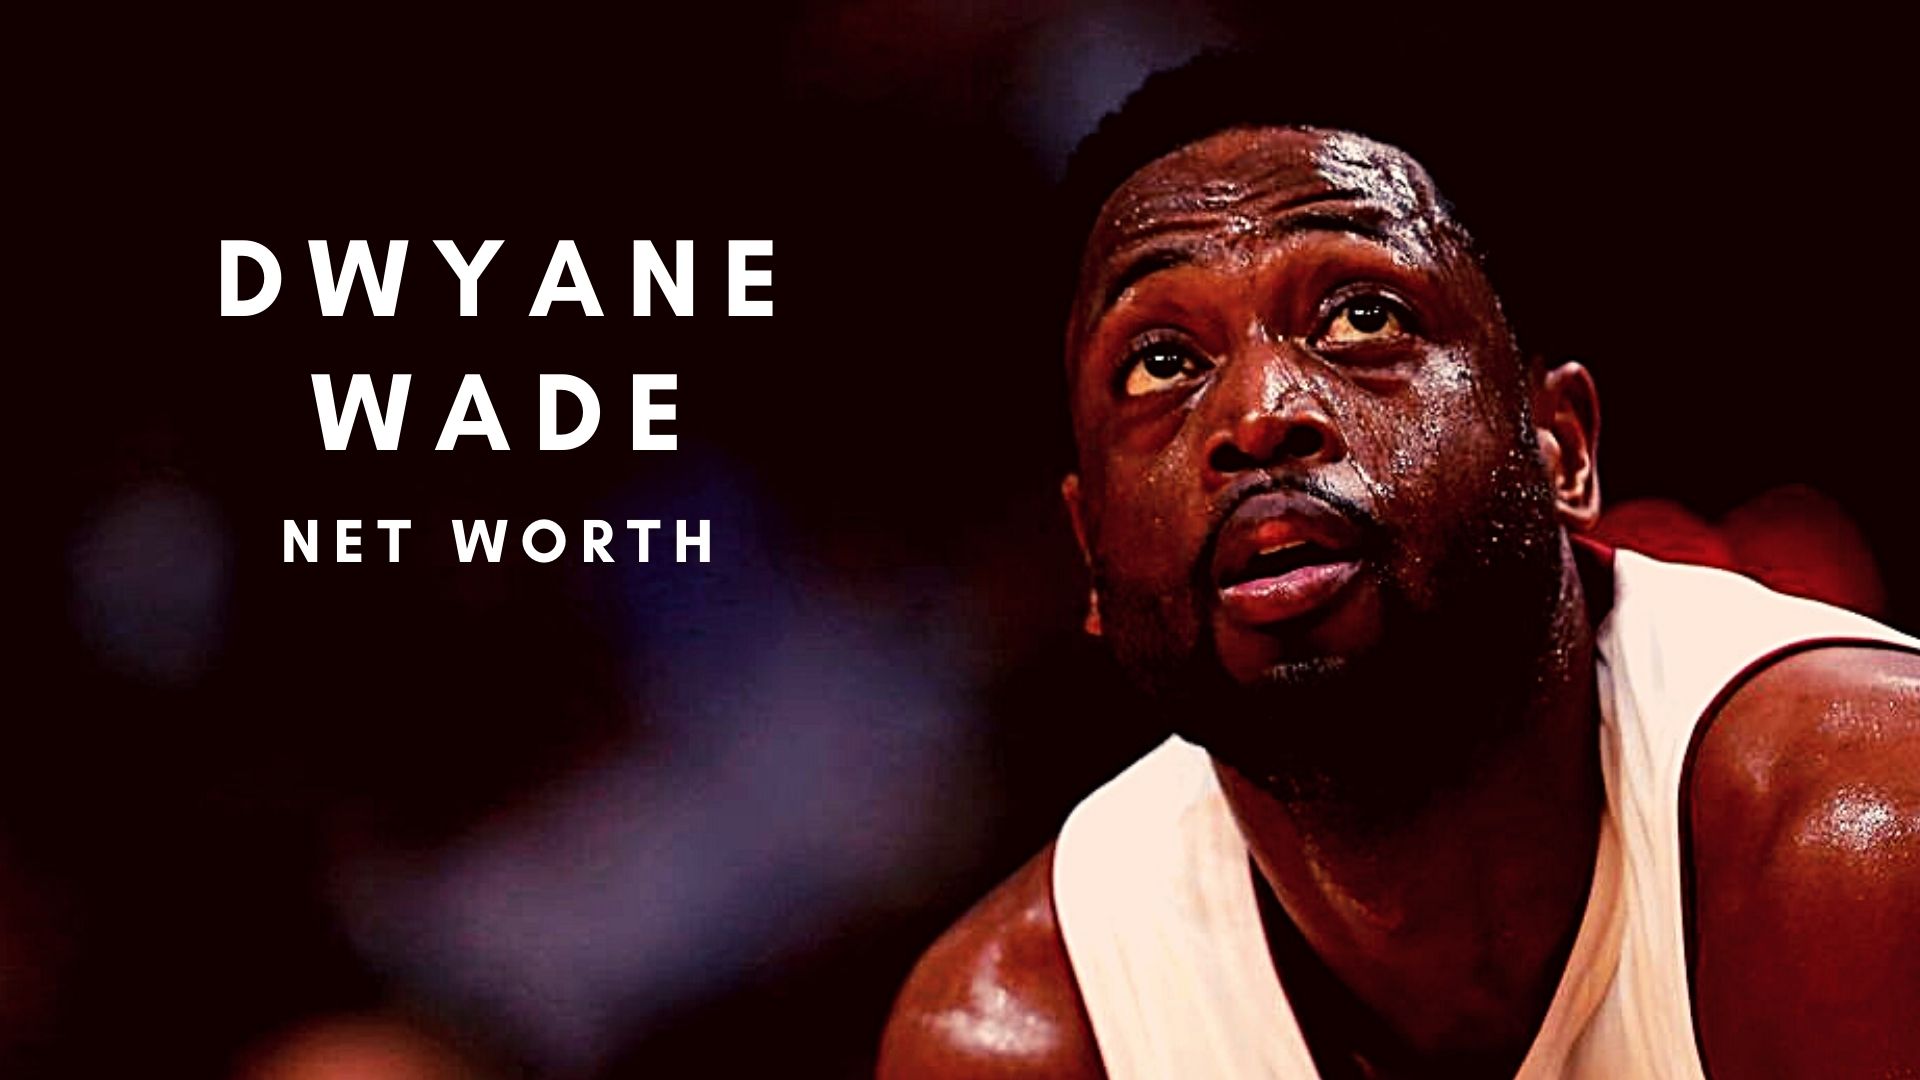 Dwyane Wade 2021 Net Worth, Salary, Records, and Endorsements